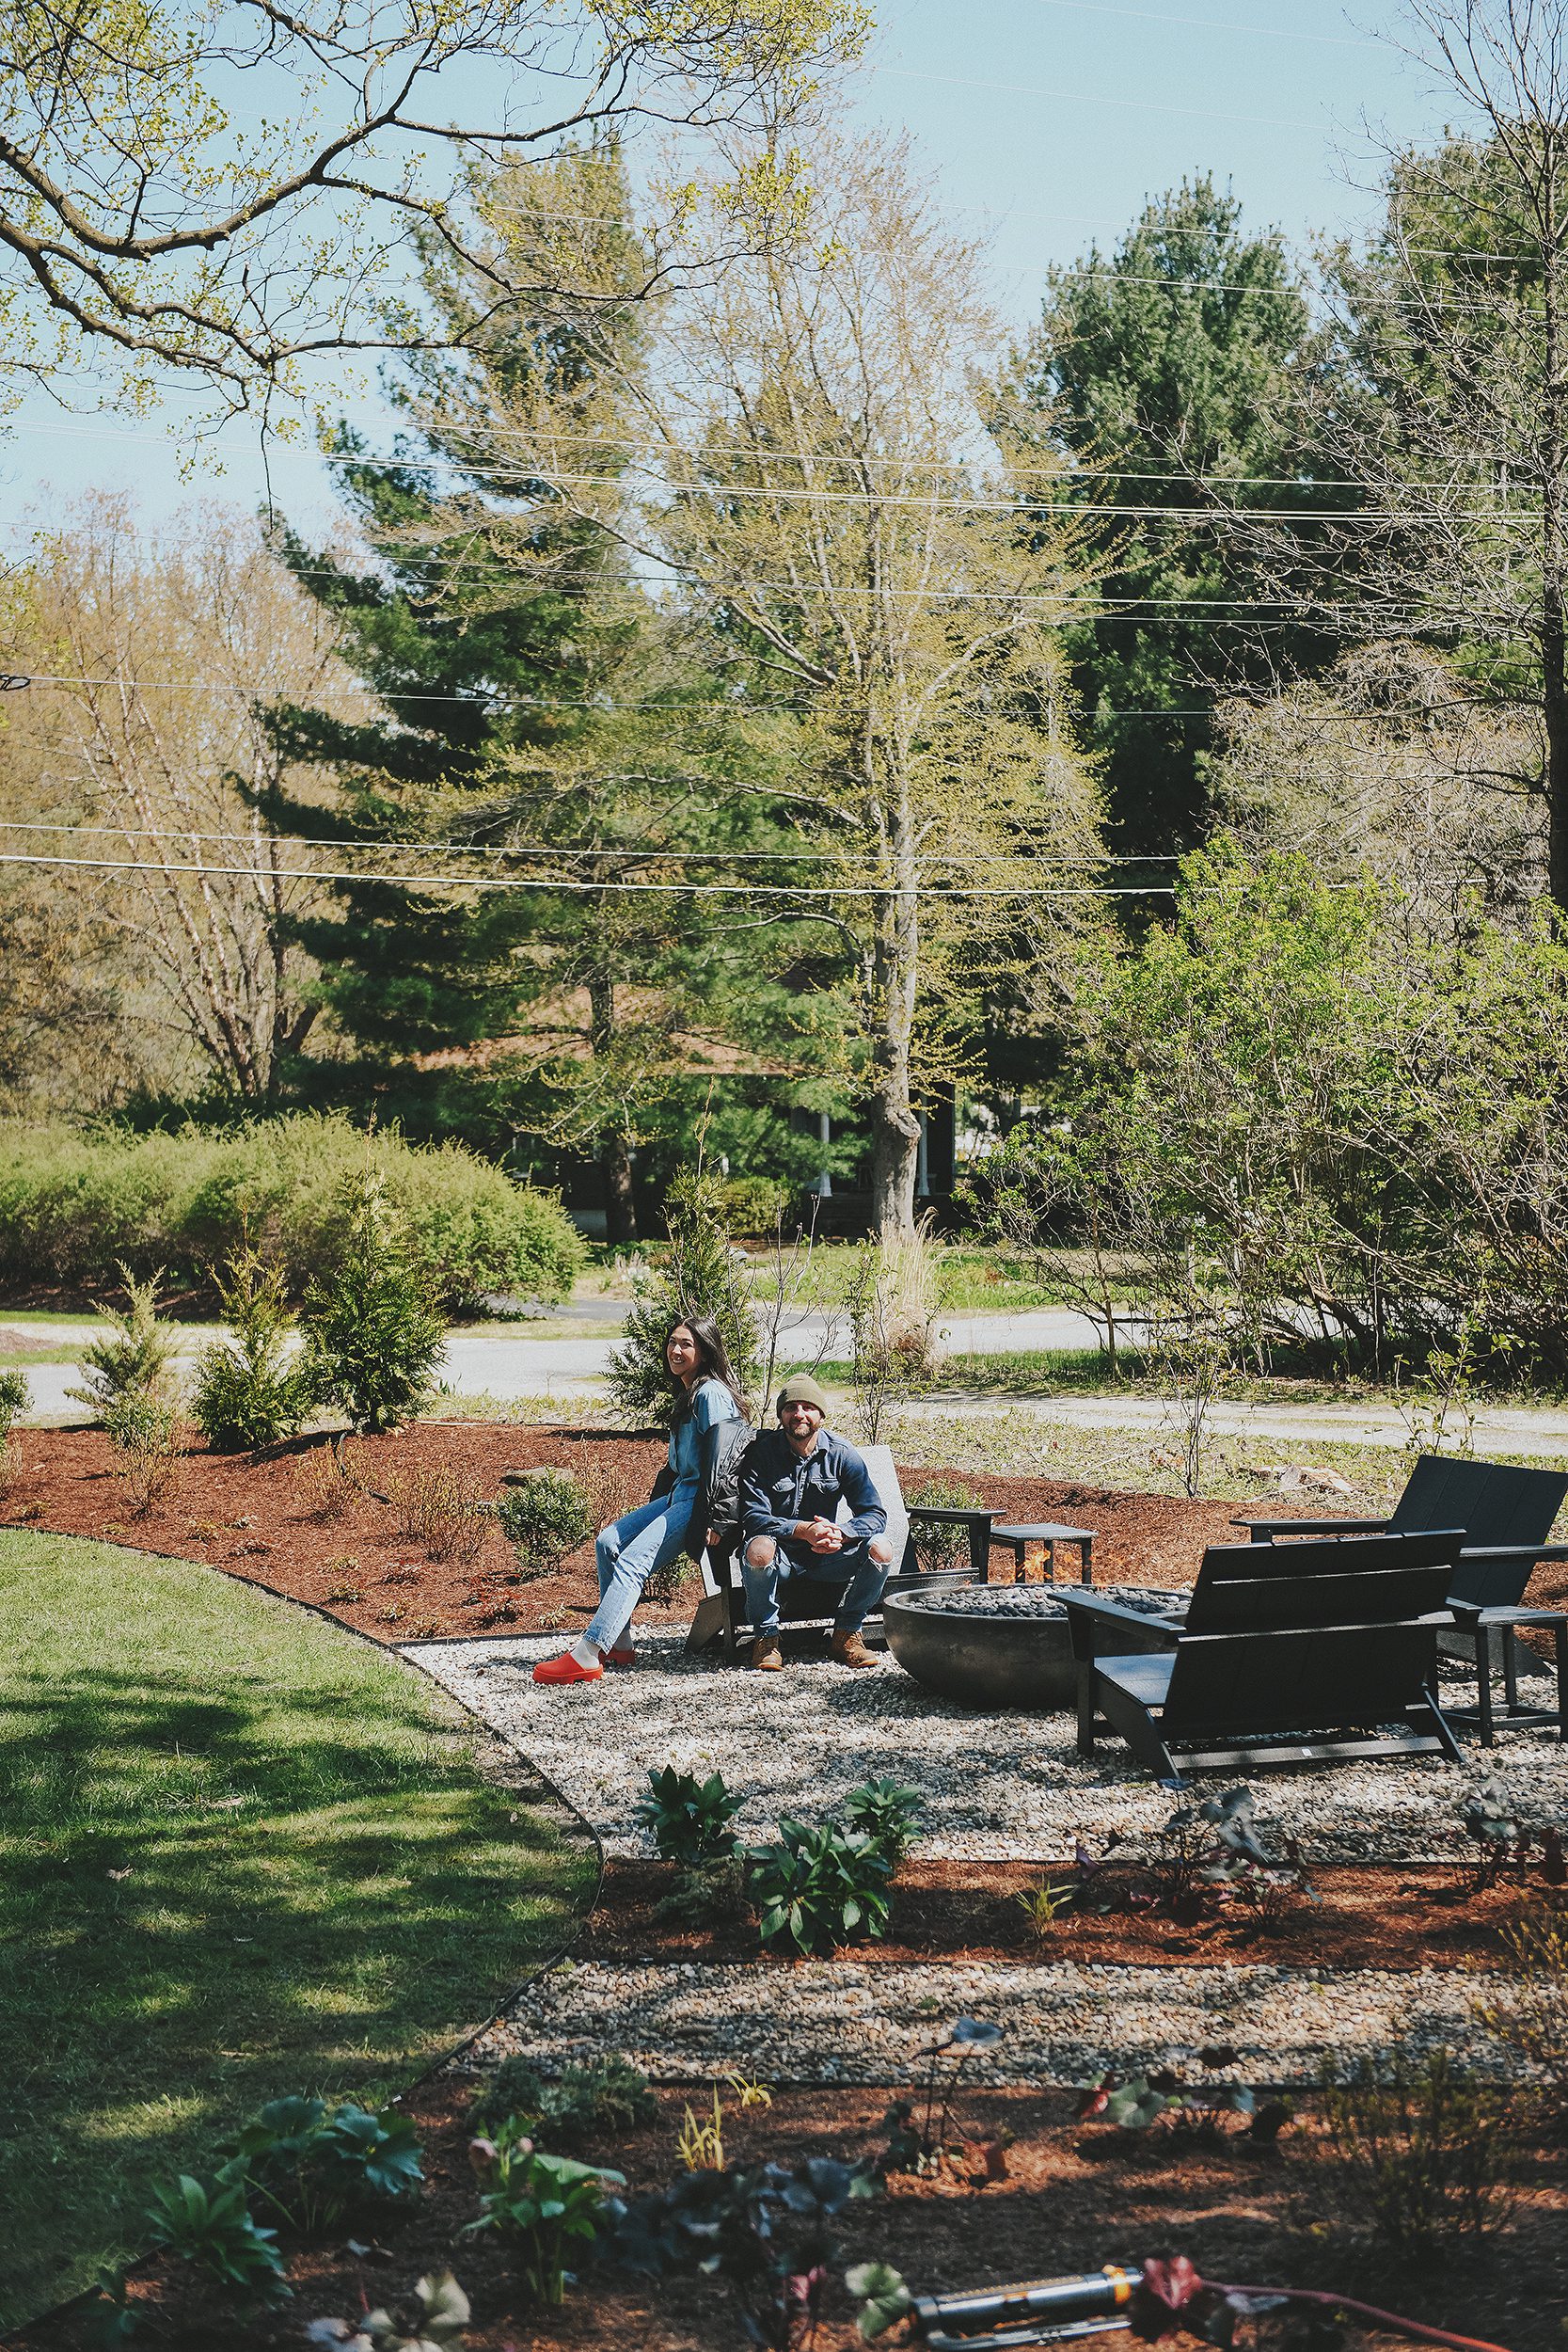 Scott + Kim relax on the new outdoor furniture after completing the landscaping project  // via Yellow Brick Home